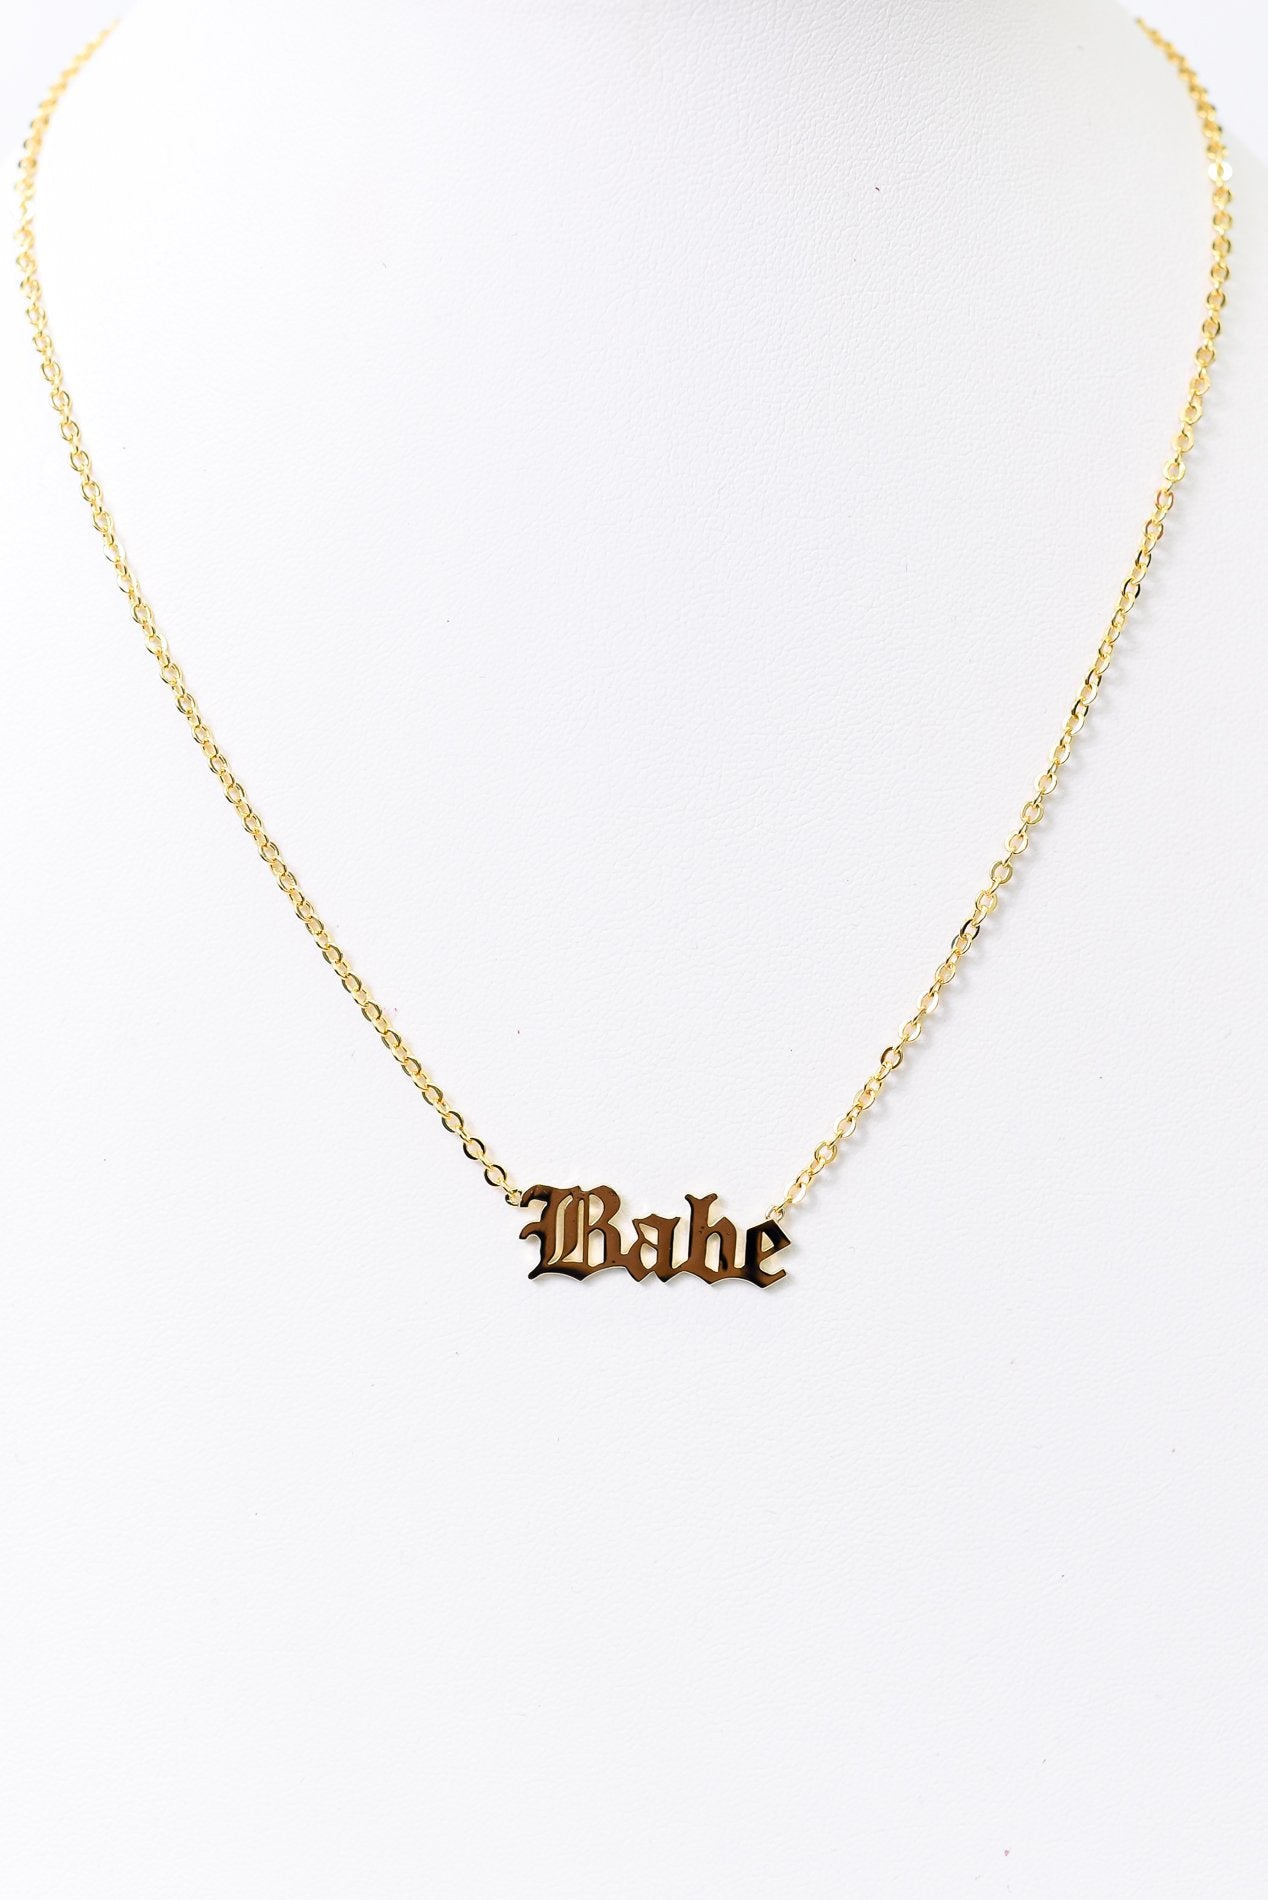 Gold/Chain Linked/'Babe' Necklace - NEK3888GO